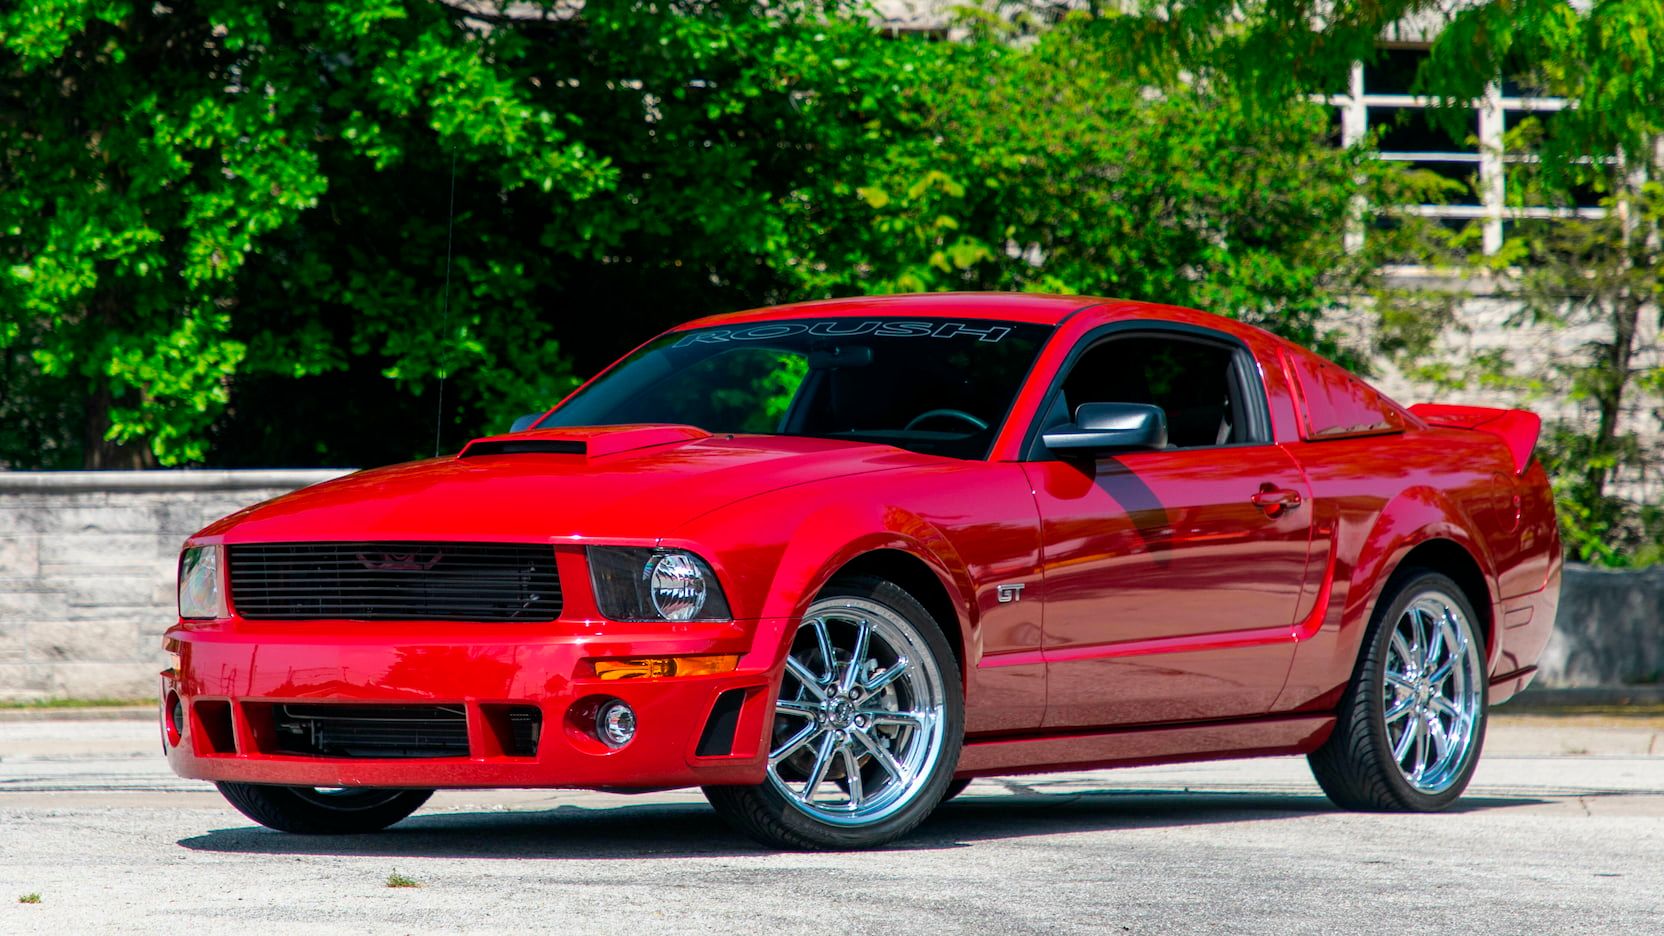 Here Are The Most Reliable Muscle Cars To Buy Used (And 5 To Stay Away From)